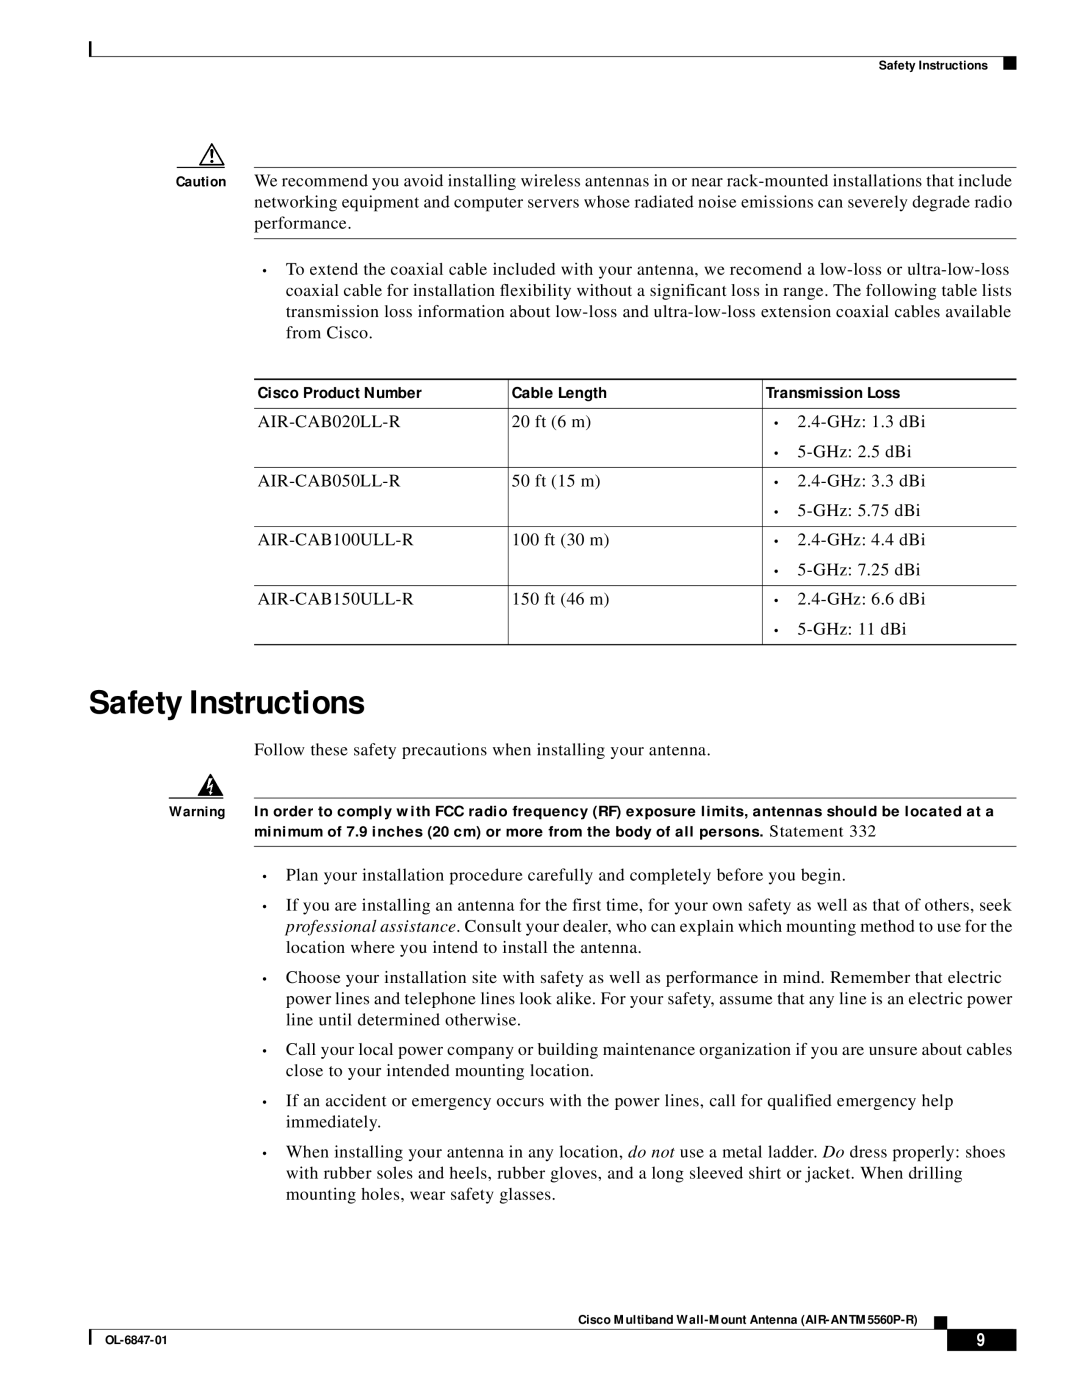 Cisco Systems AIR-ANTM5560P-R warranty Safety Instructions, Cisco Product Number, Cable Length, Transmission Loss 